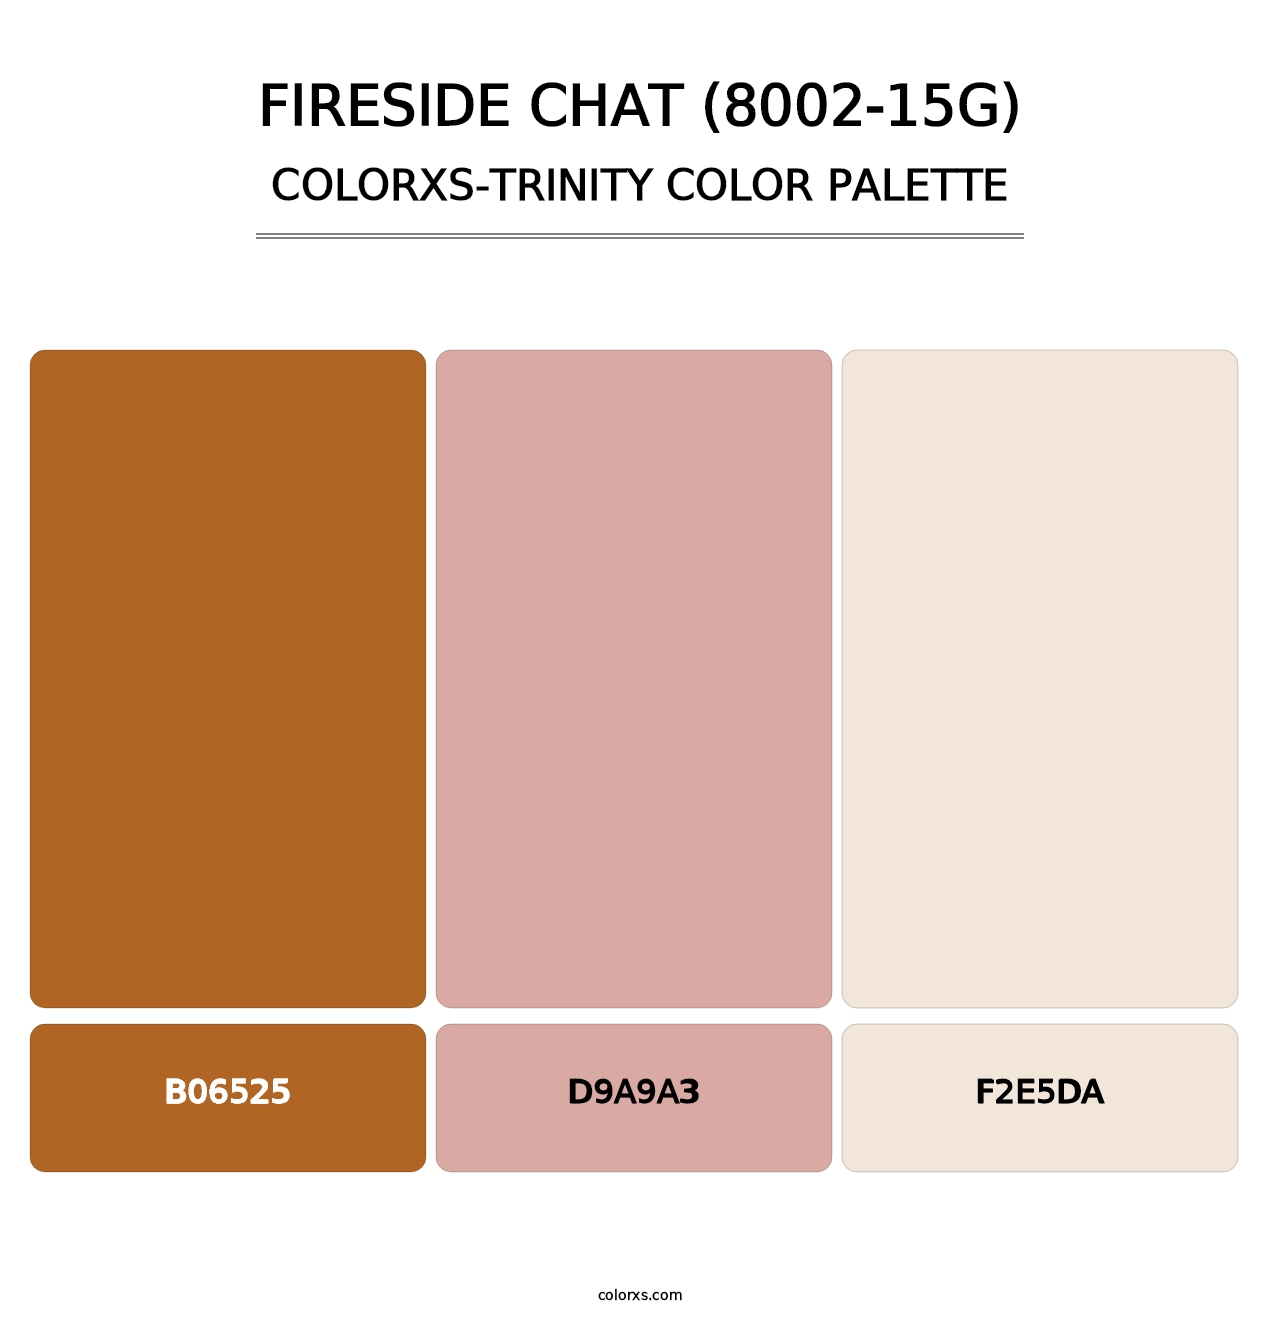 Fireside Chat (8002-15G) - Colorxs Trinity Palette